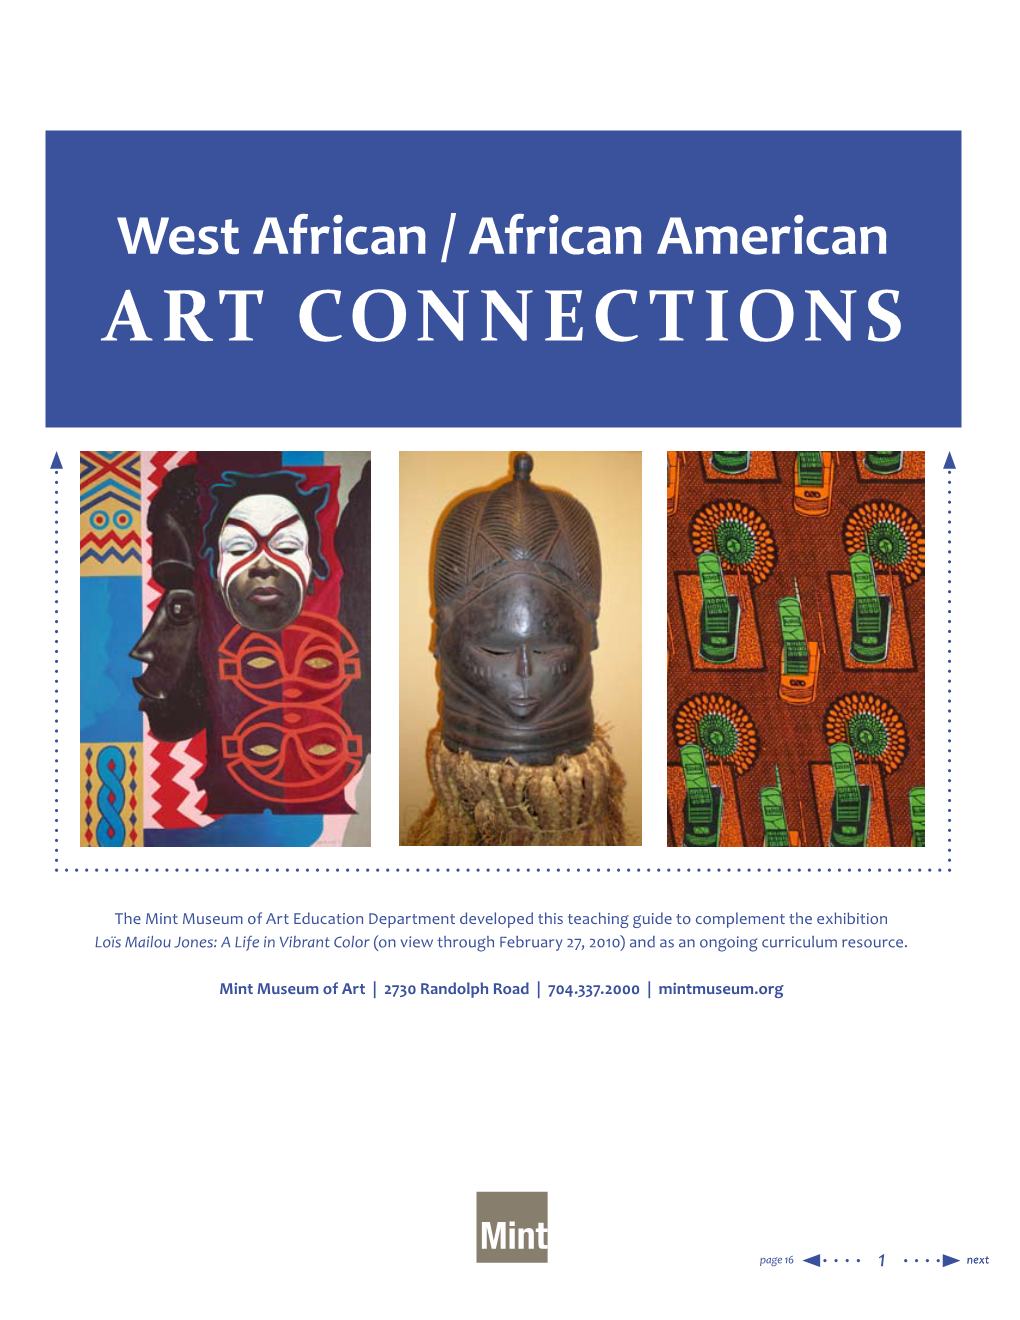 West African / African American ART CONNECTIONS